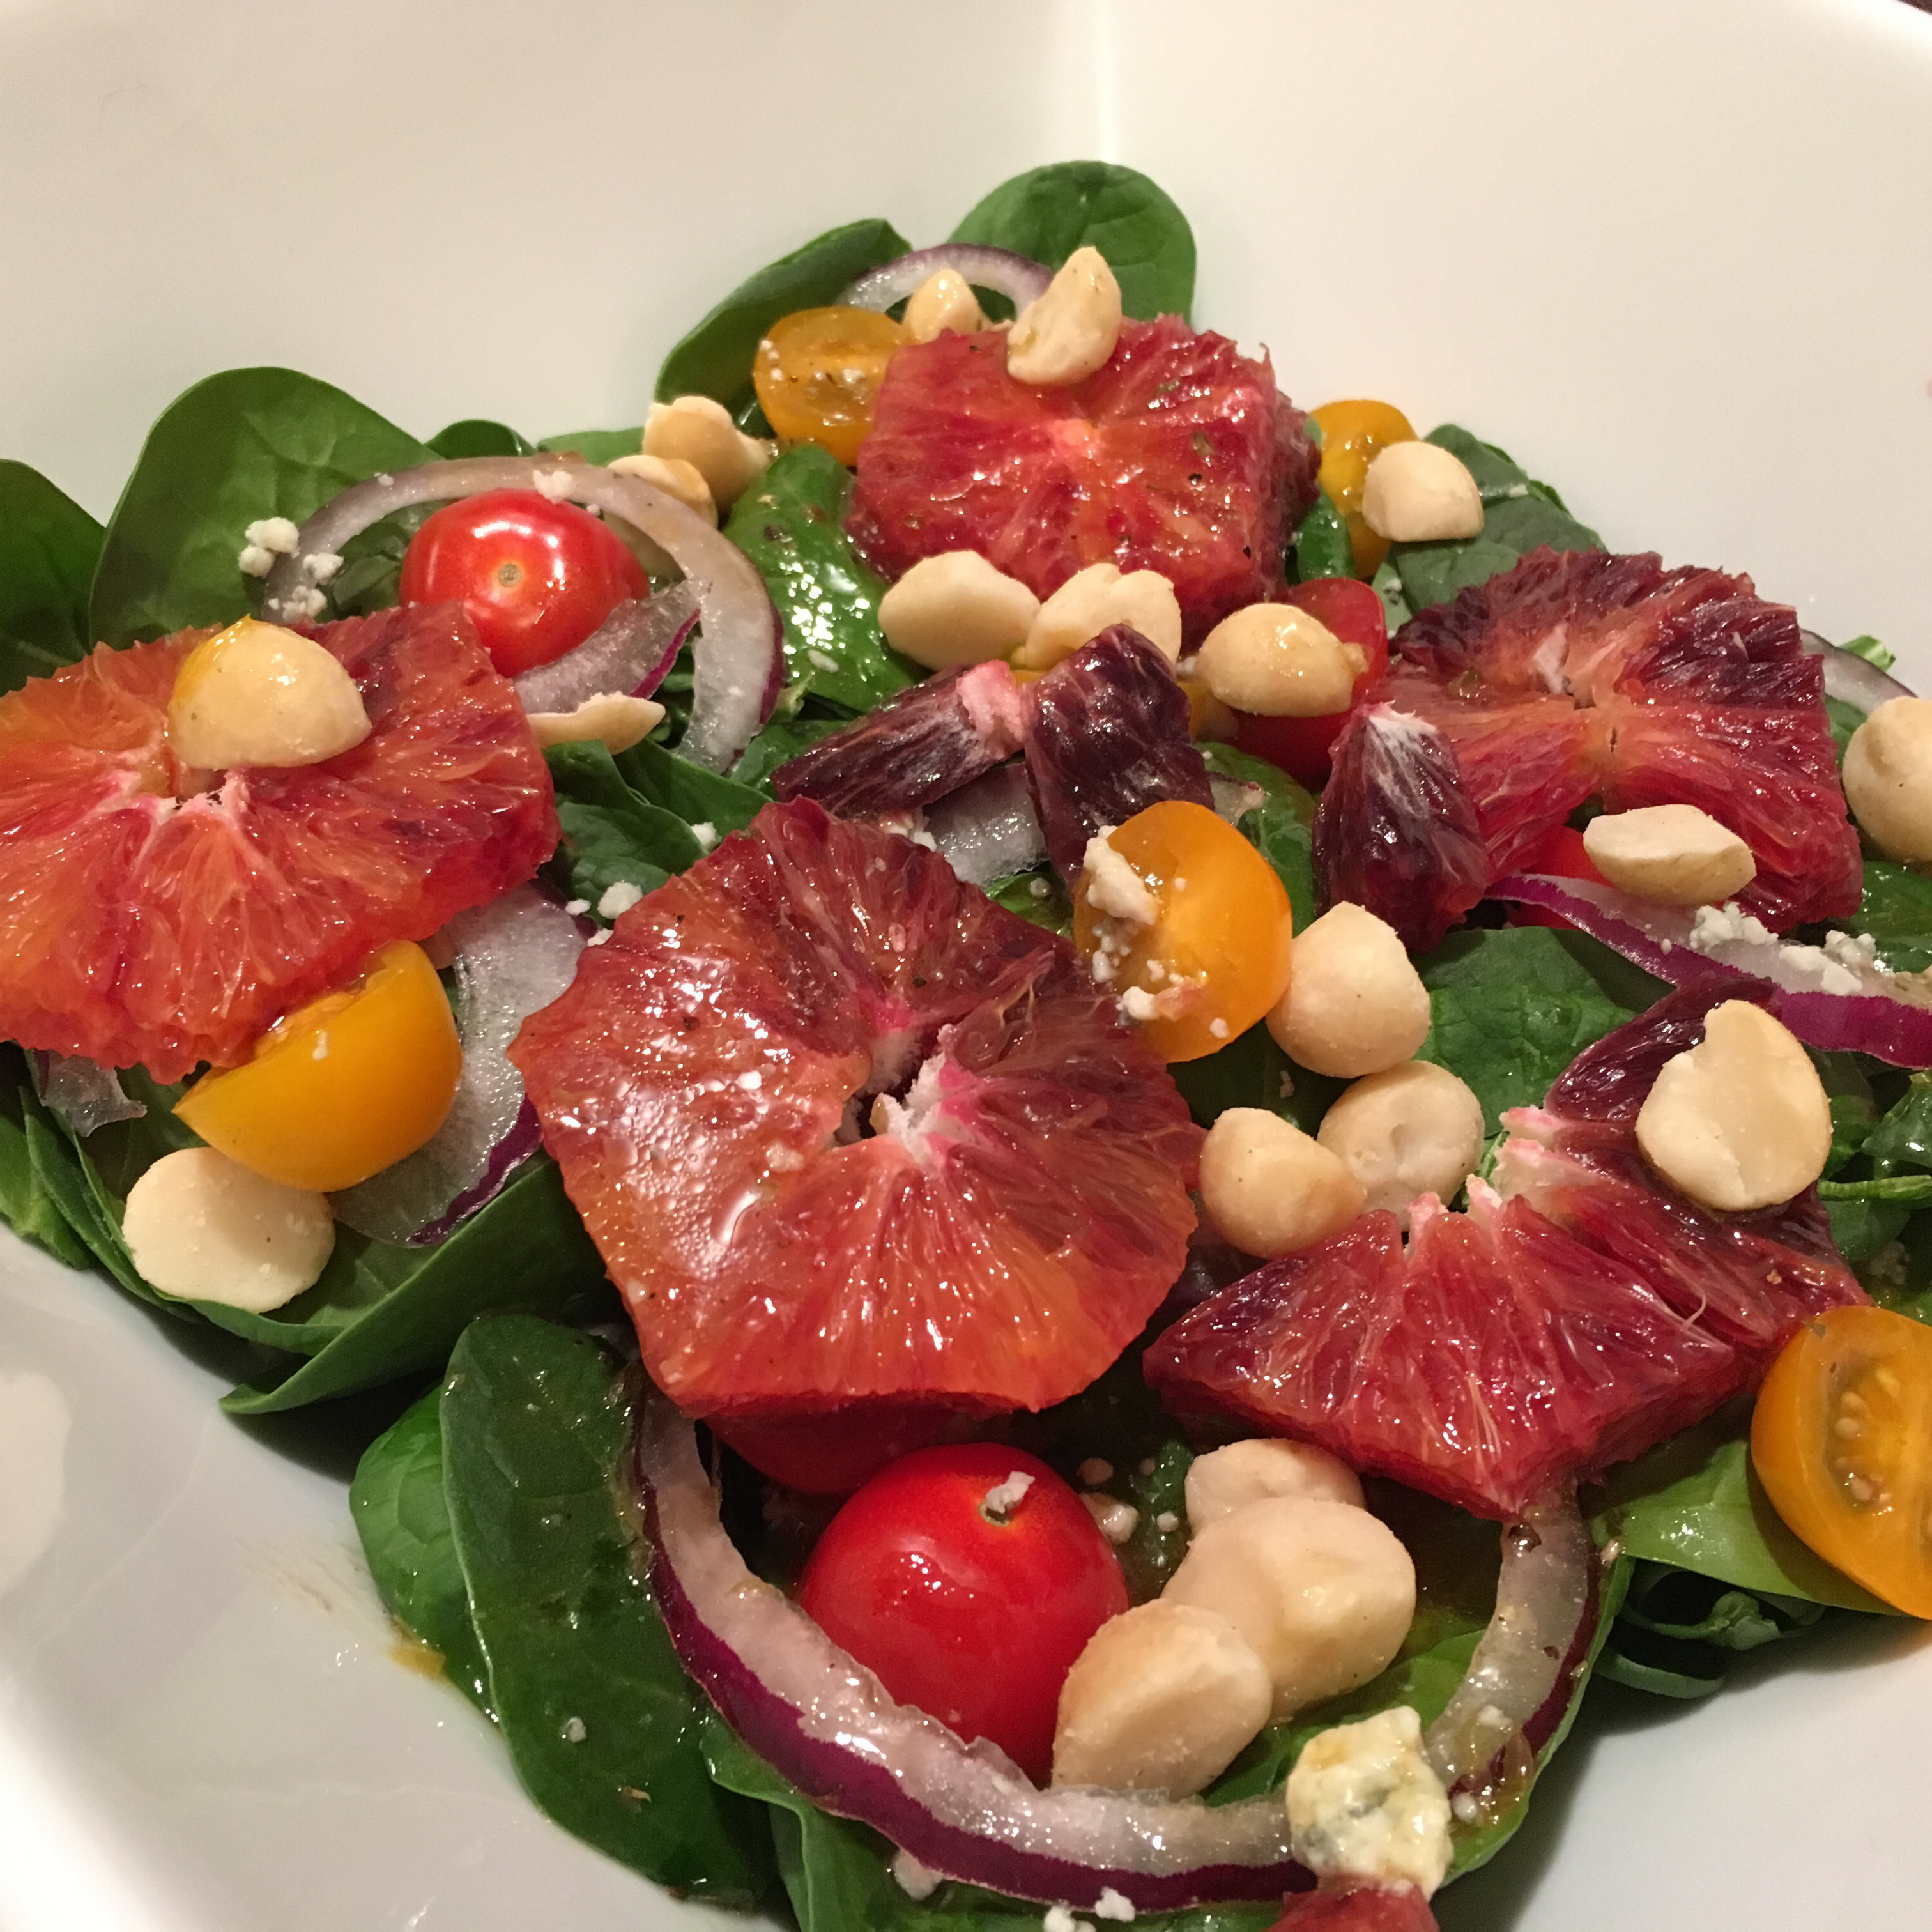 Spinach Salad with Blood Oranges and Macadamia Nuts